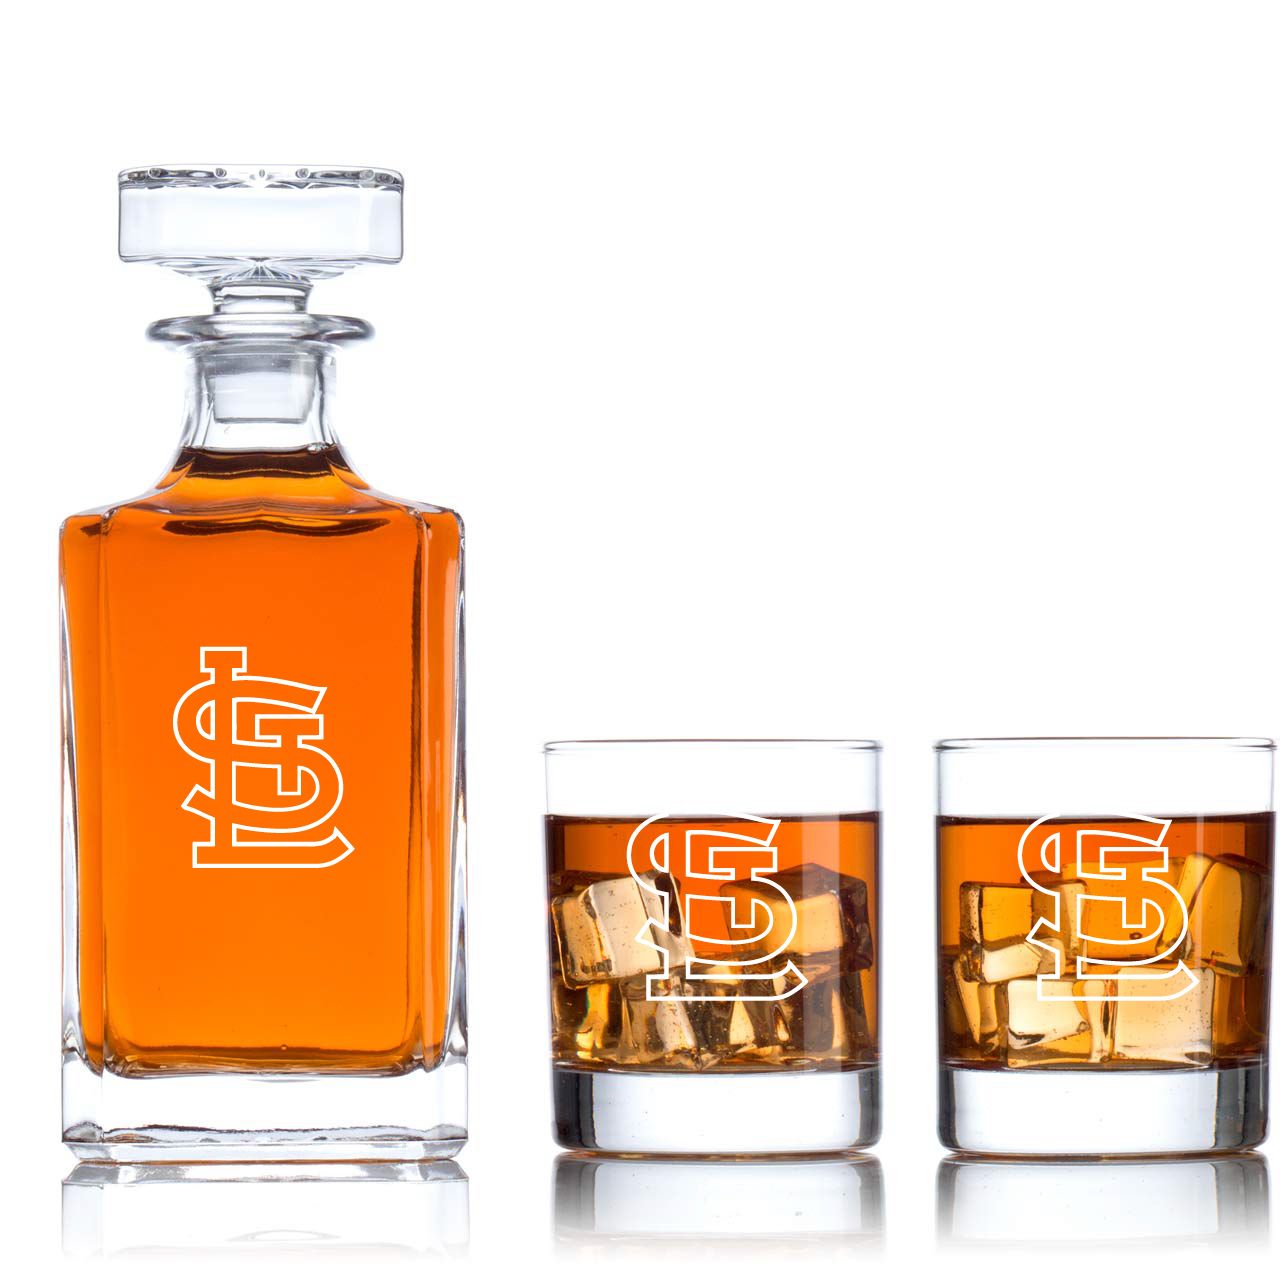 Engraved St Louis Cardinals - Personalized Classic Decanter Set with Old Fashioned Whiskey ...